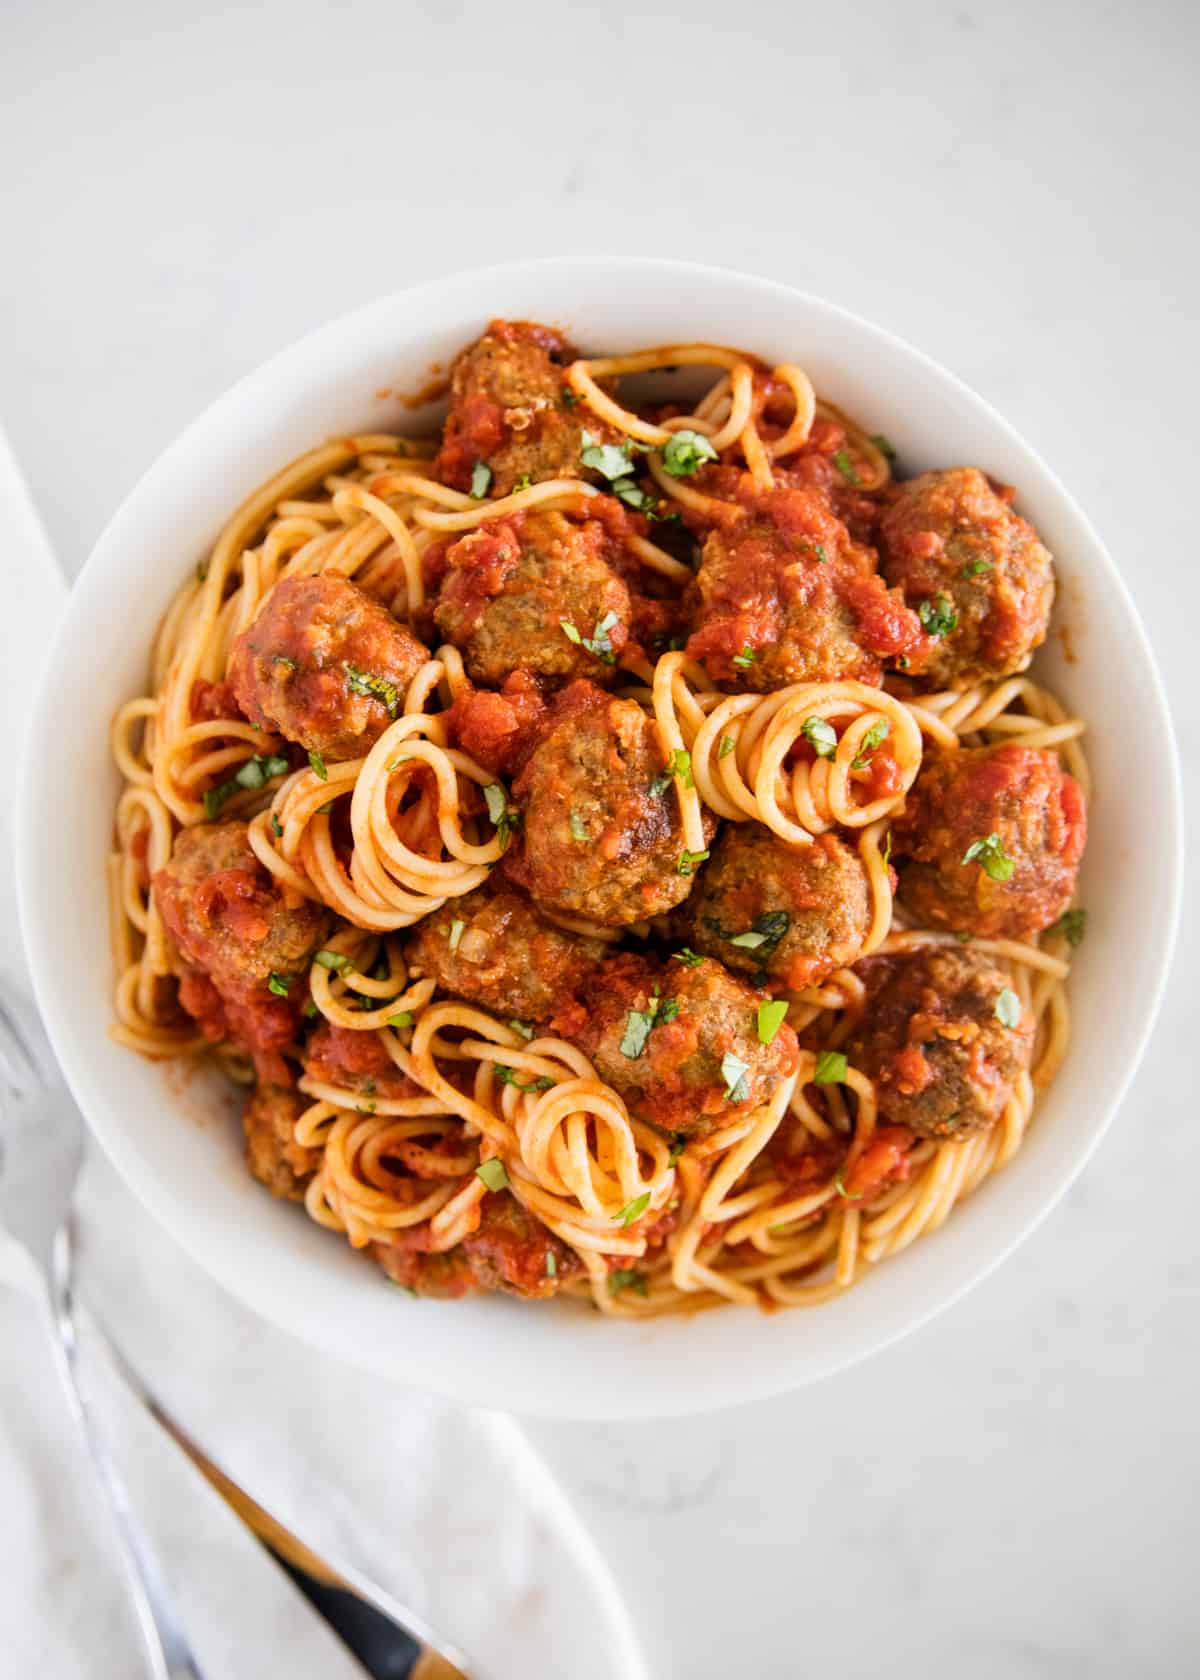 Spaghetti and meatballs on white plate.